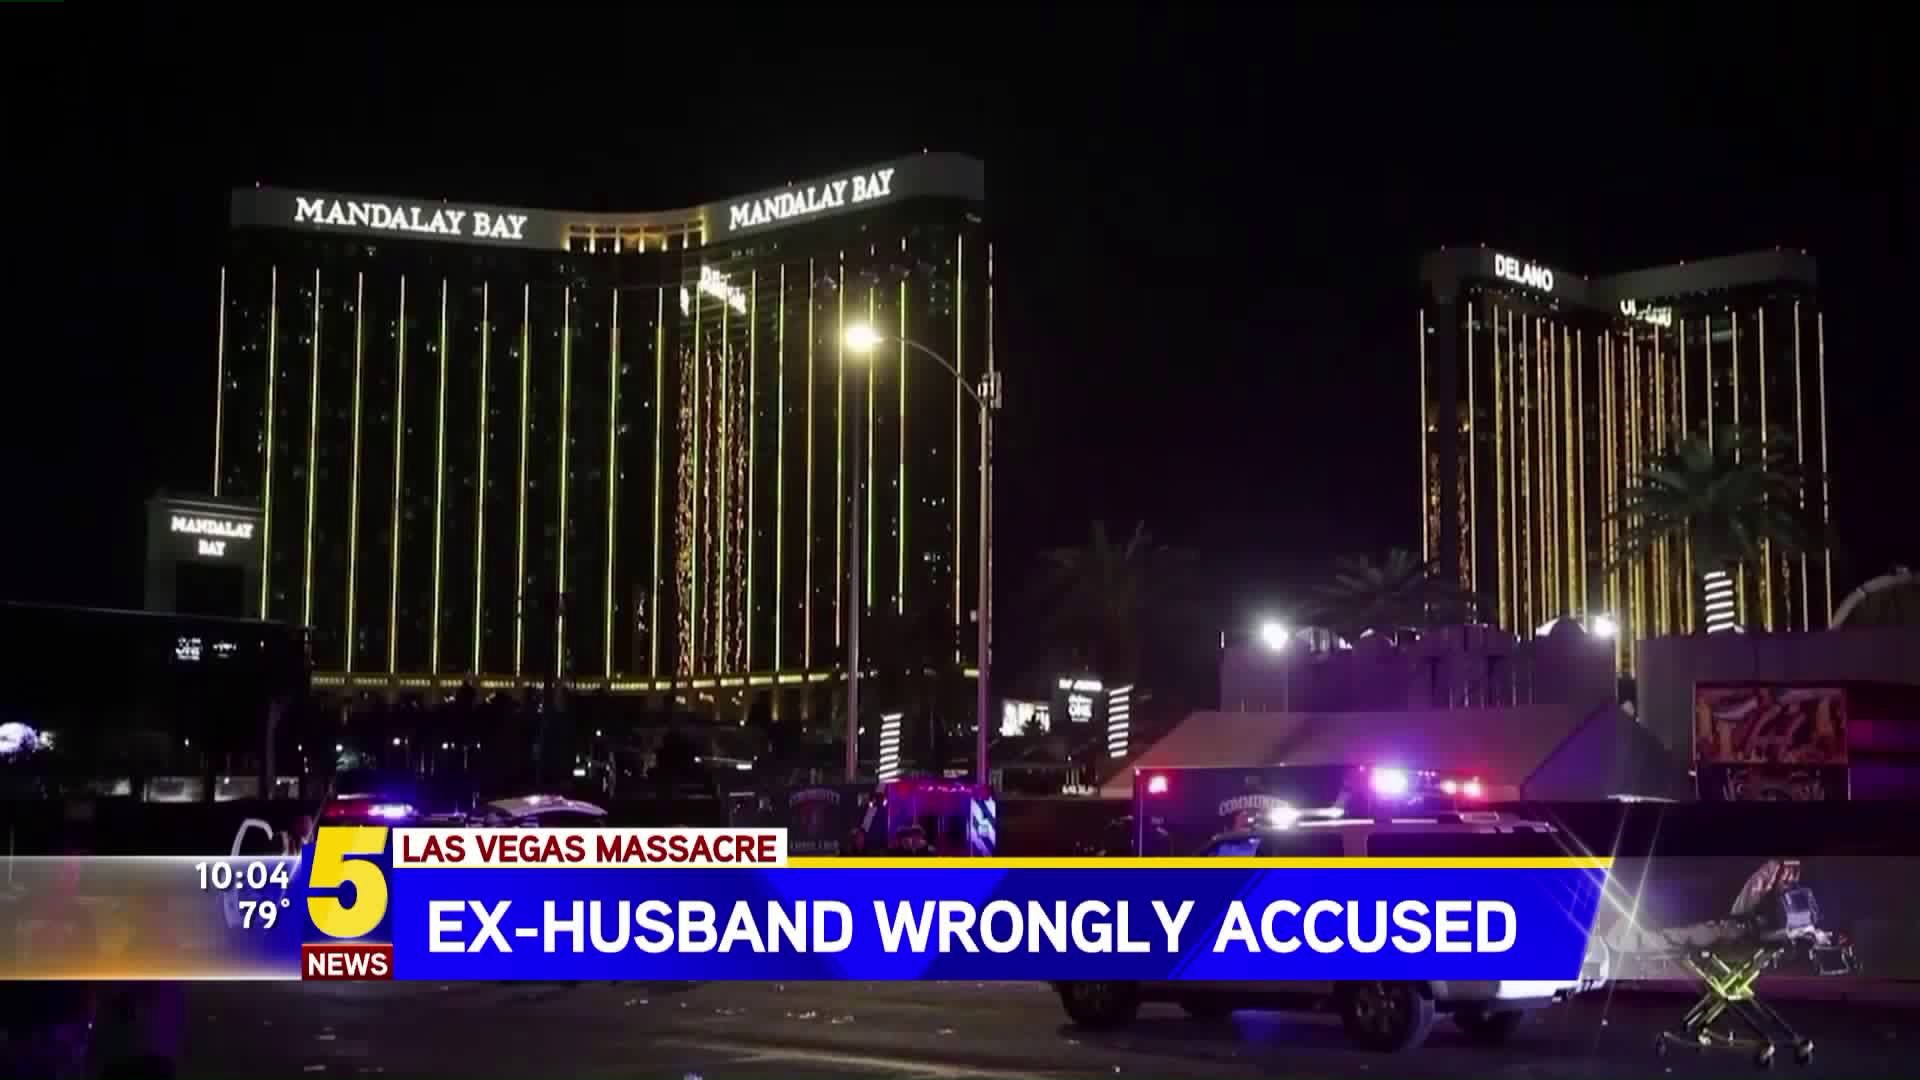 Ex-Husband Wrongly Accused